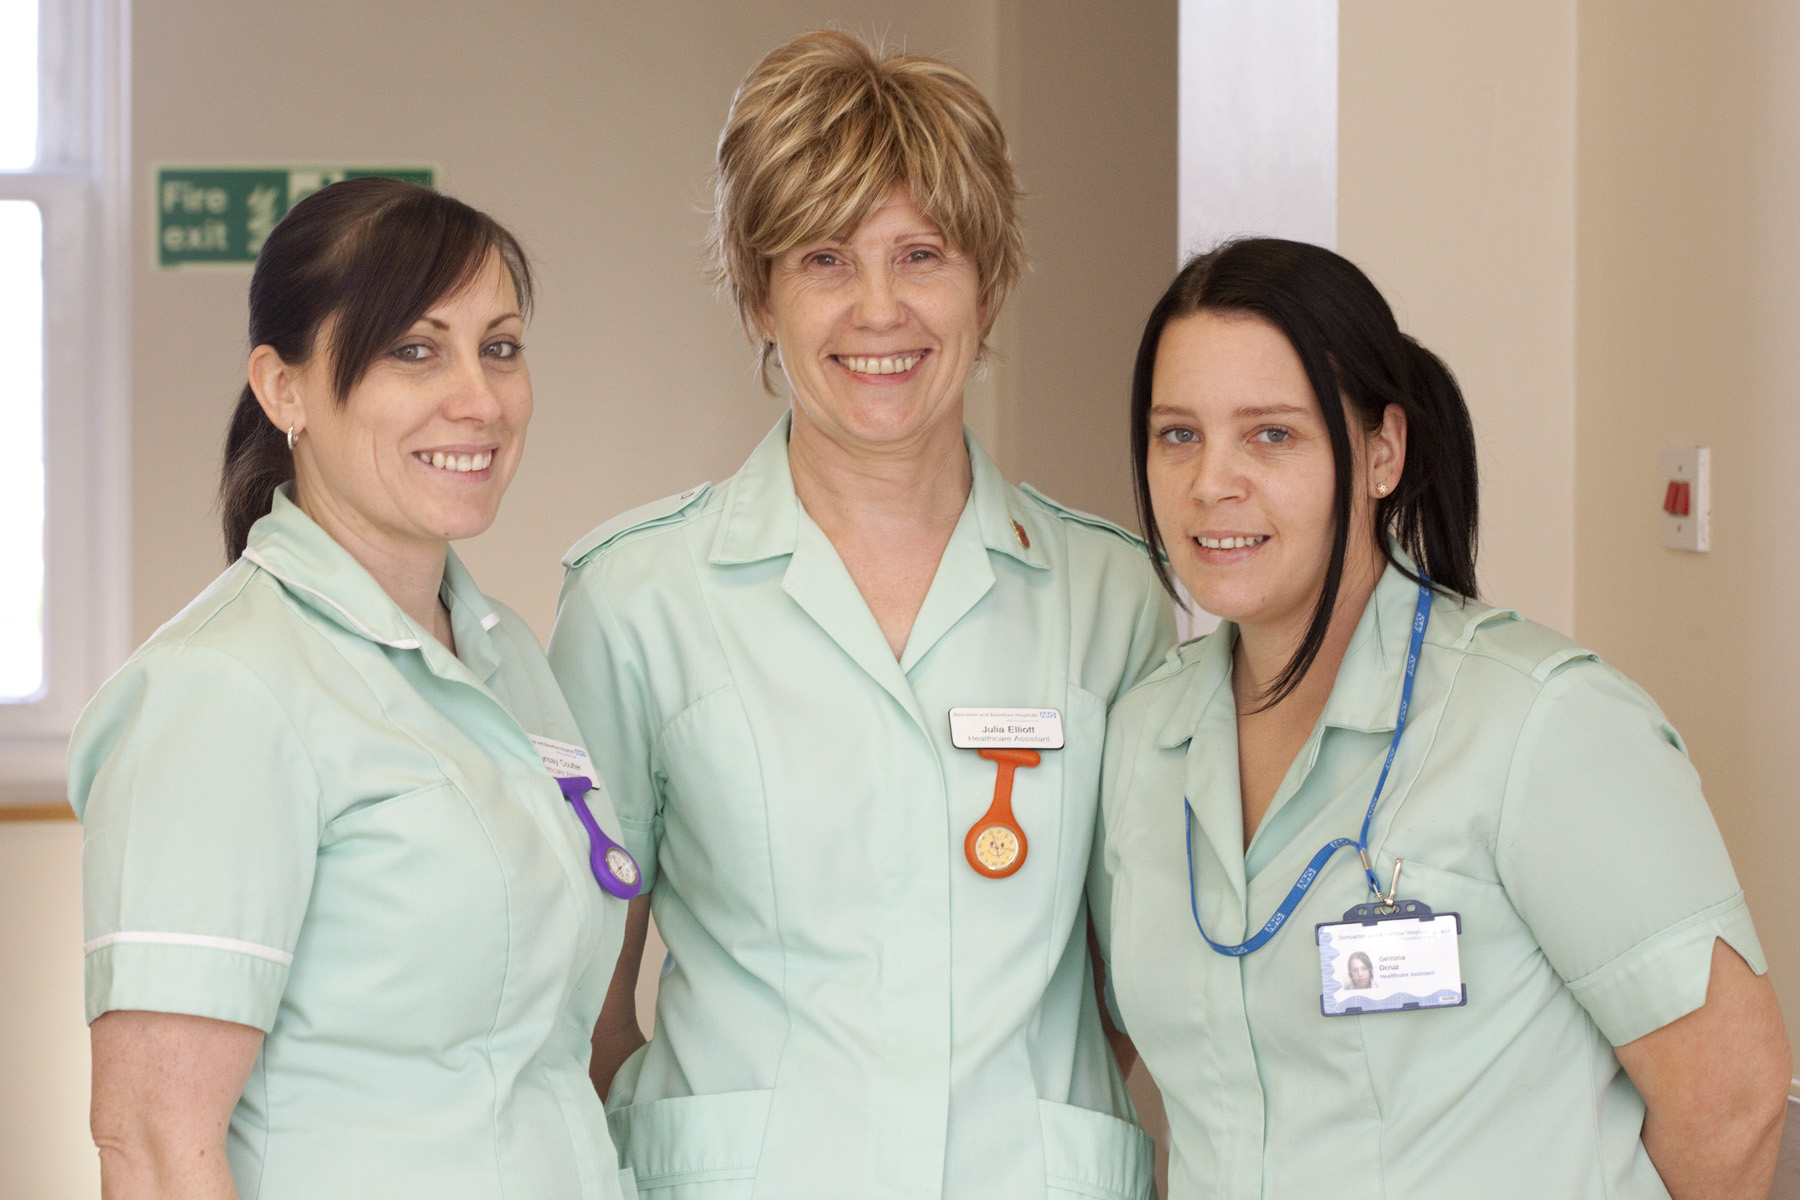 Private carer jobs in doncaster